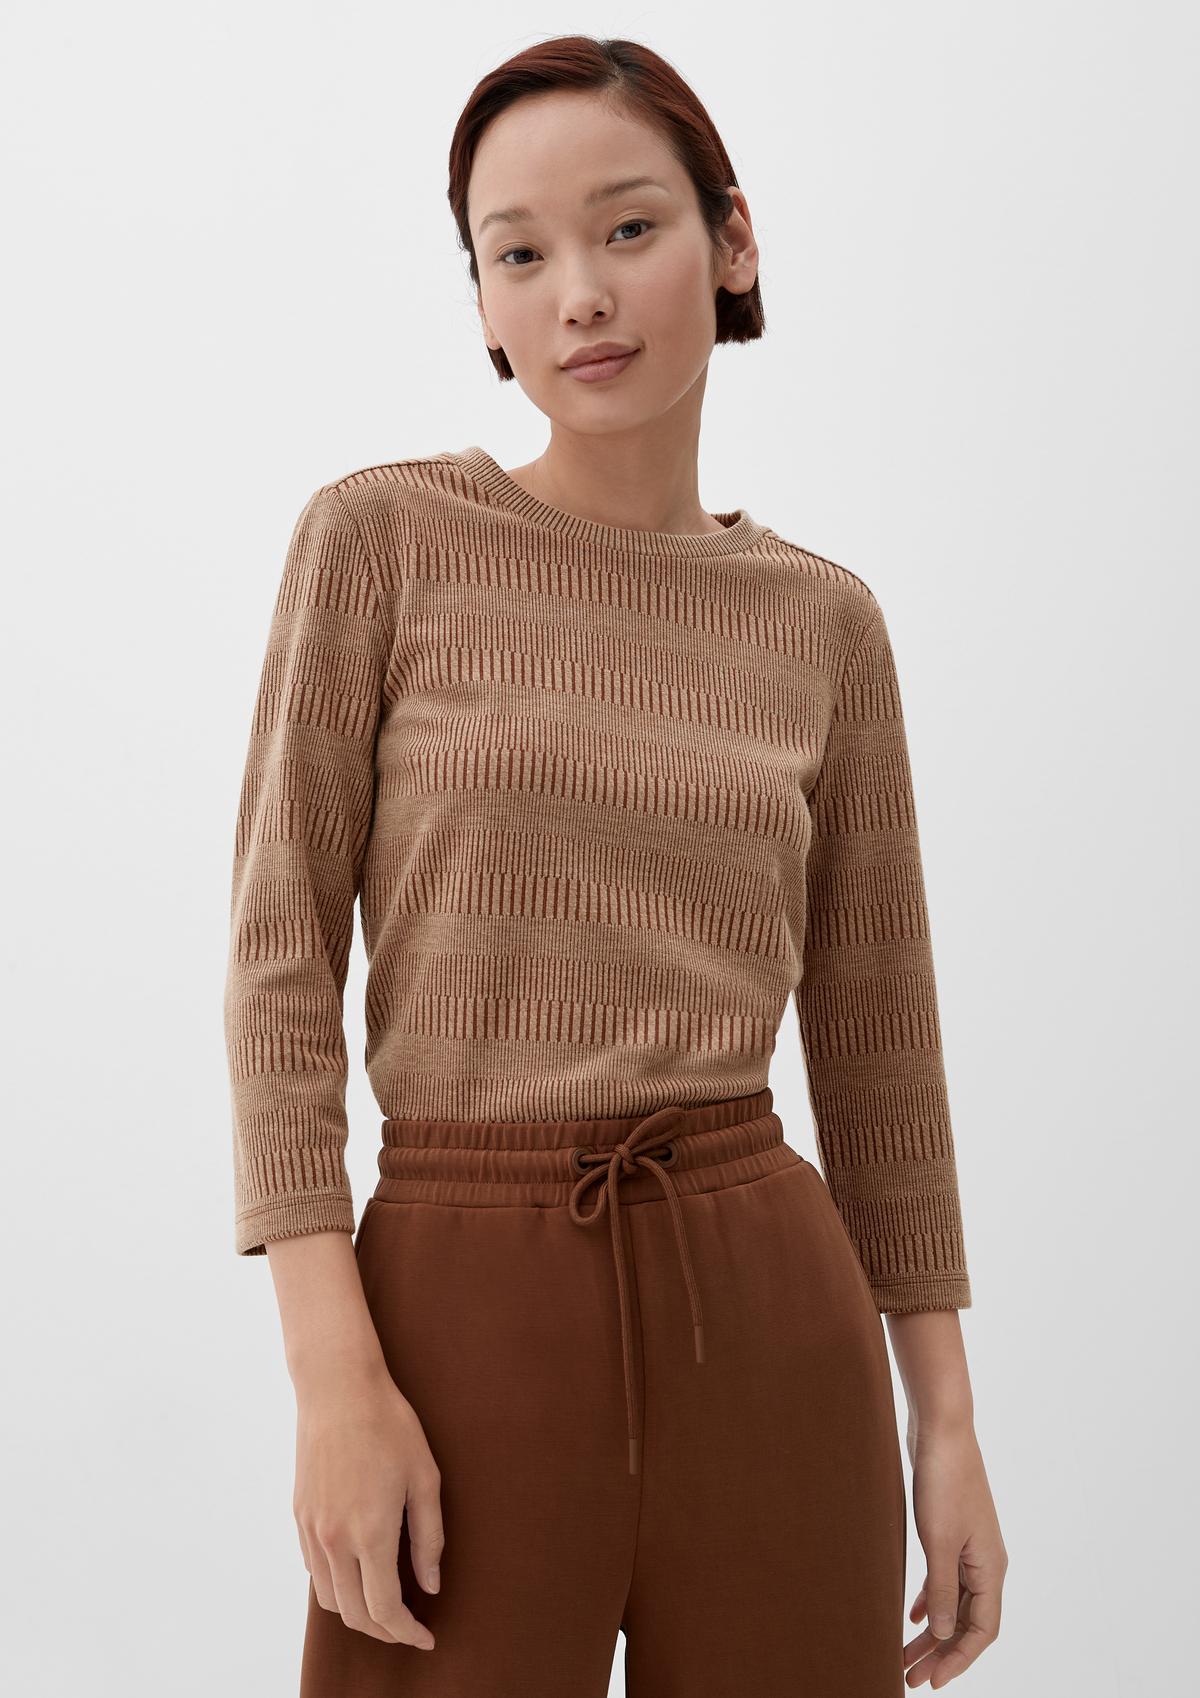 Textured top made of stretch viscose